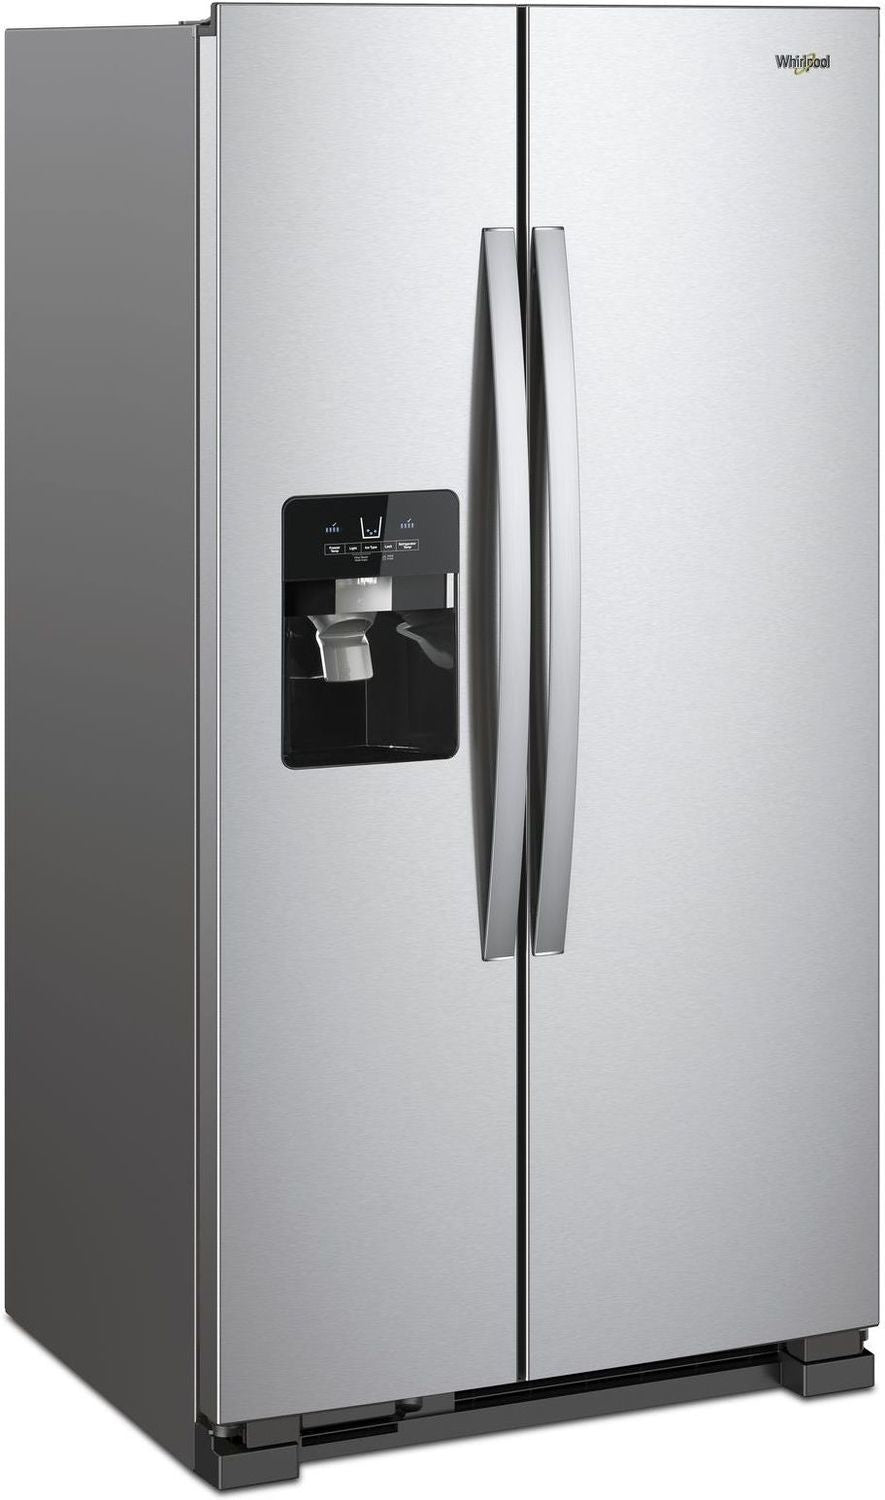 Whirlpool Monochromatic Stainless Steel Side-by-Side Refrigerator (25 Cu. Ft.) - WRS335SDHM